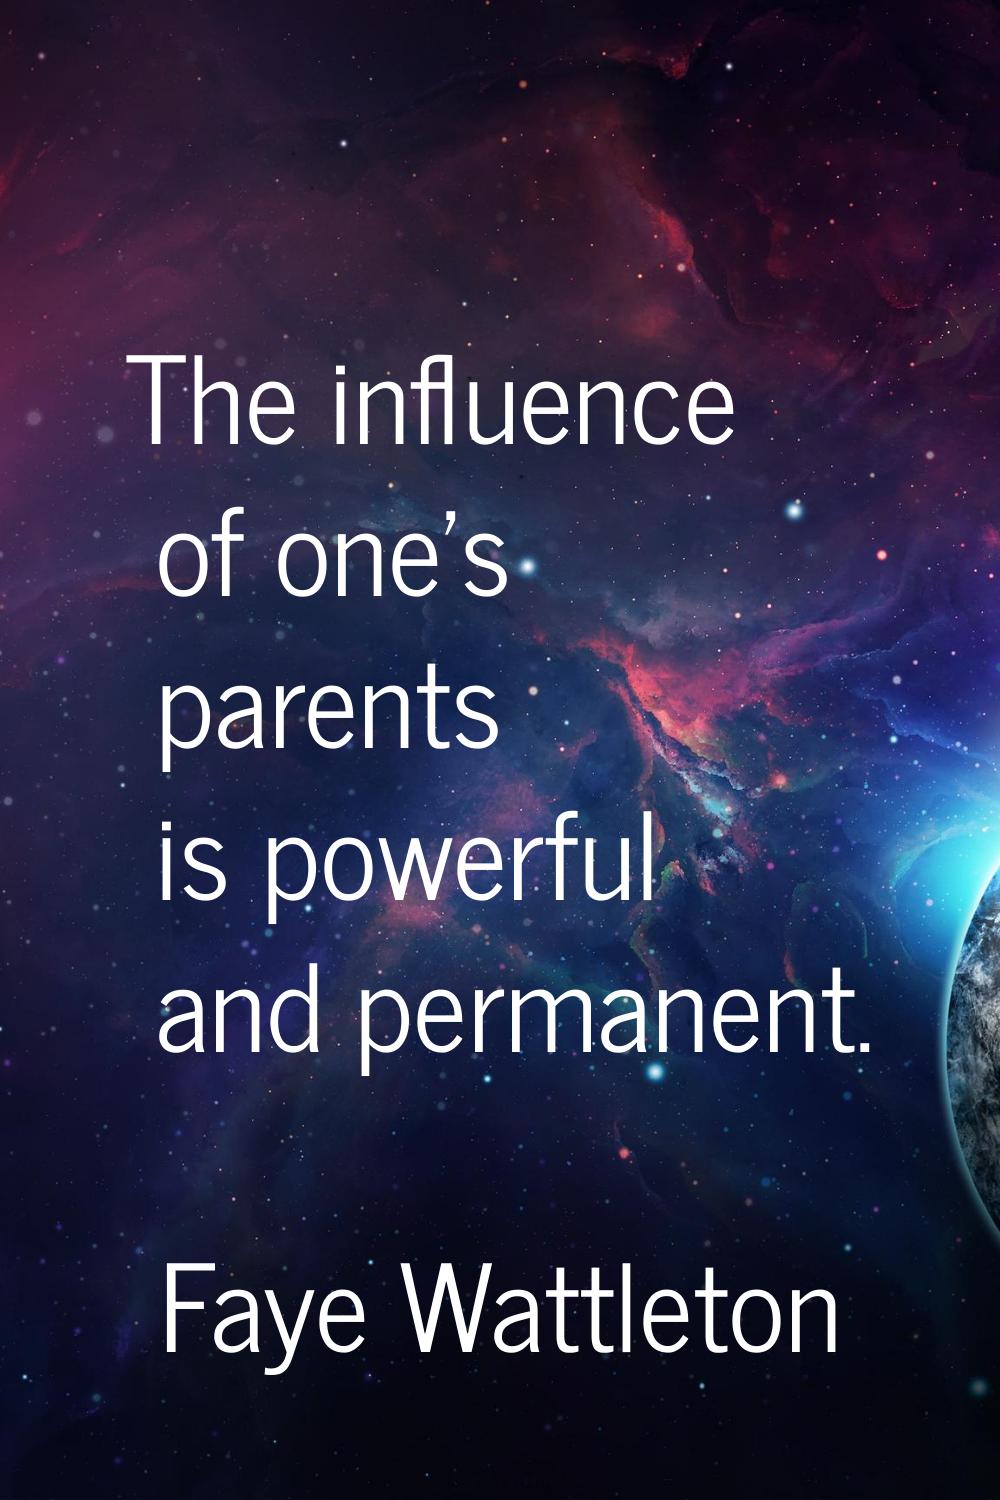 The influence of one's parents is powerful and permanent.